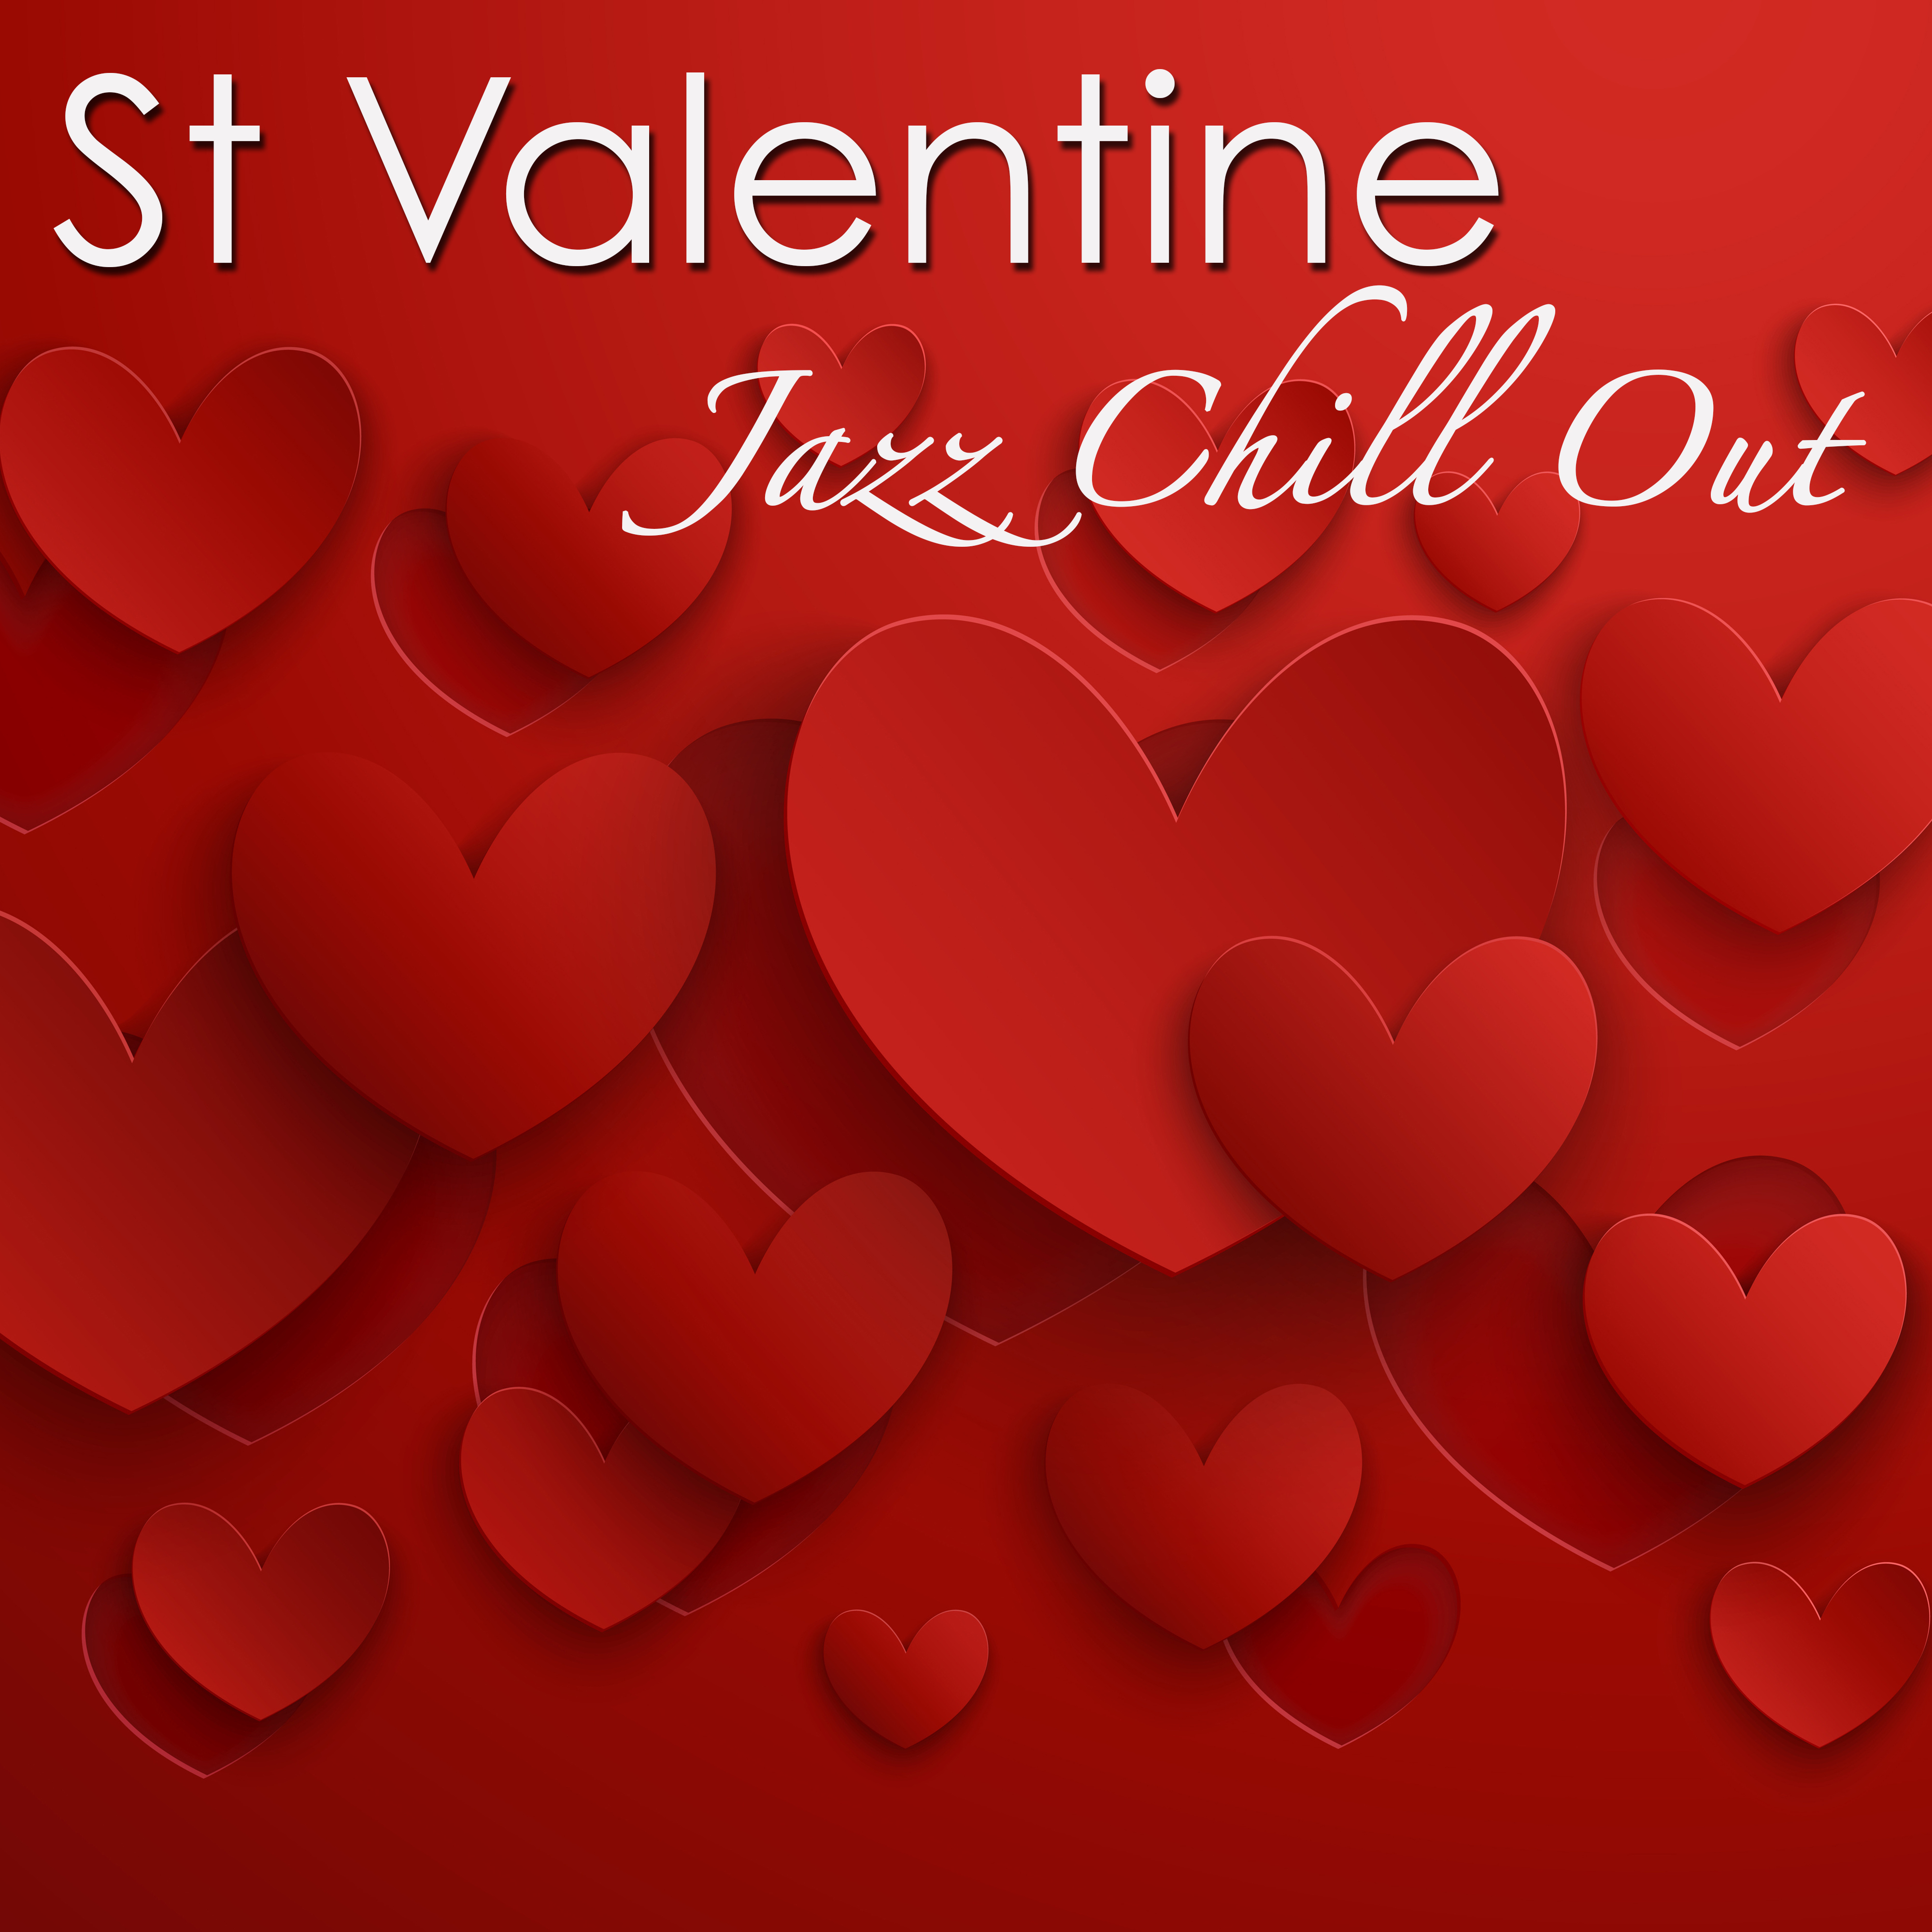 St Valentine Jazz Chill Out – Sensual Chillout, Smooth Jazz & Ambient Lounge Electronic Music for Love Day Sexy Night